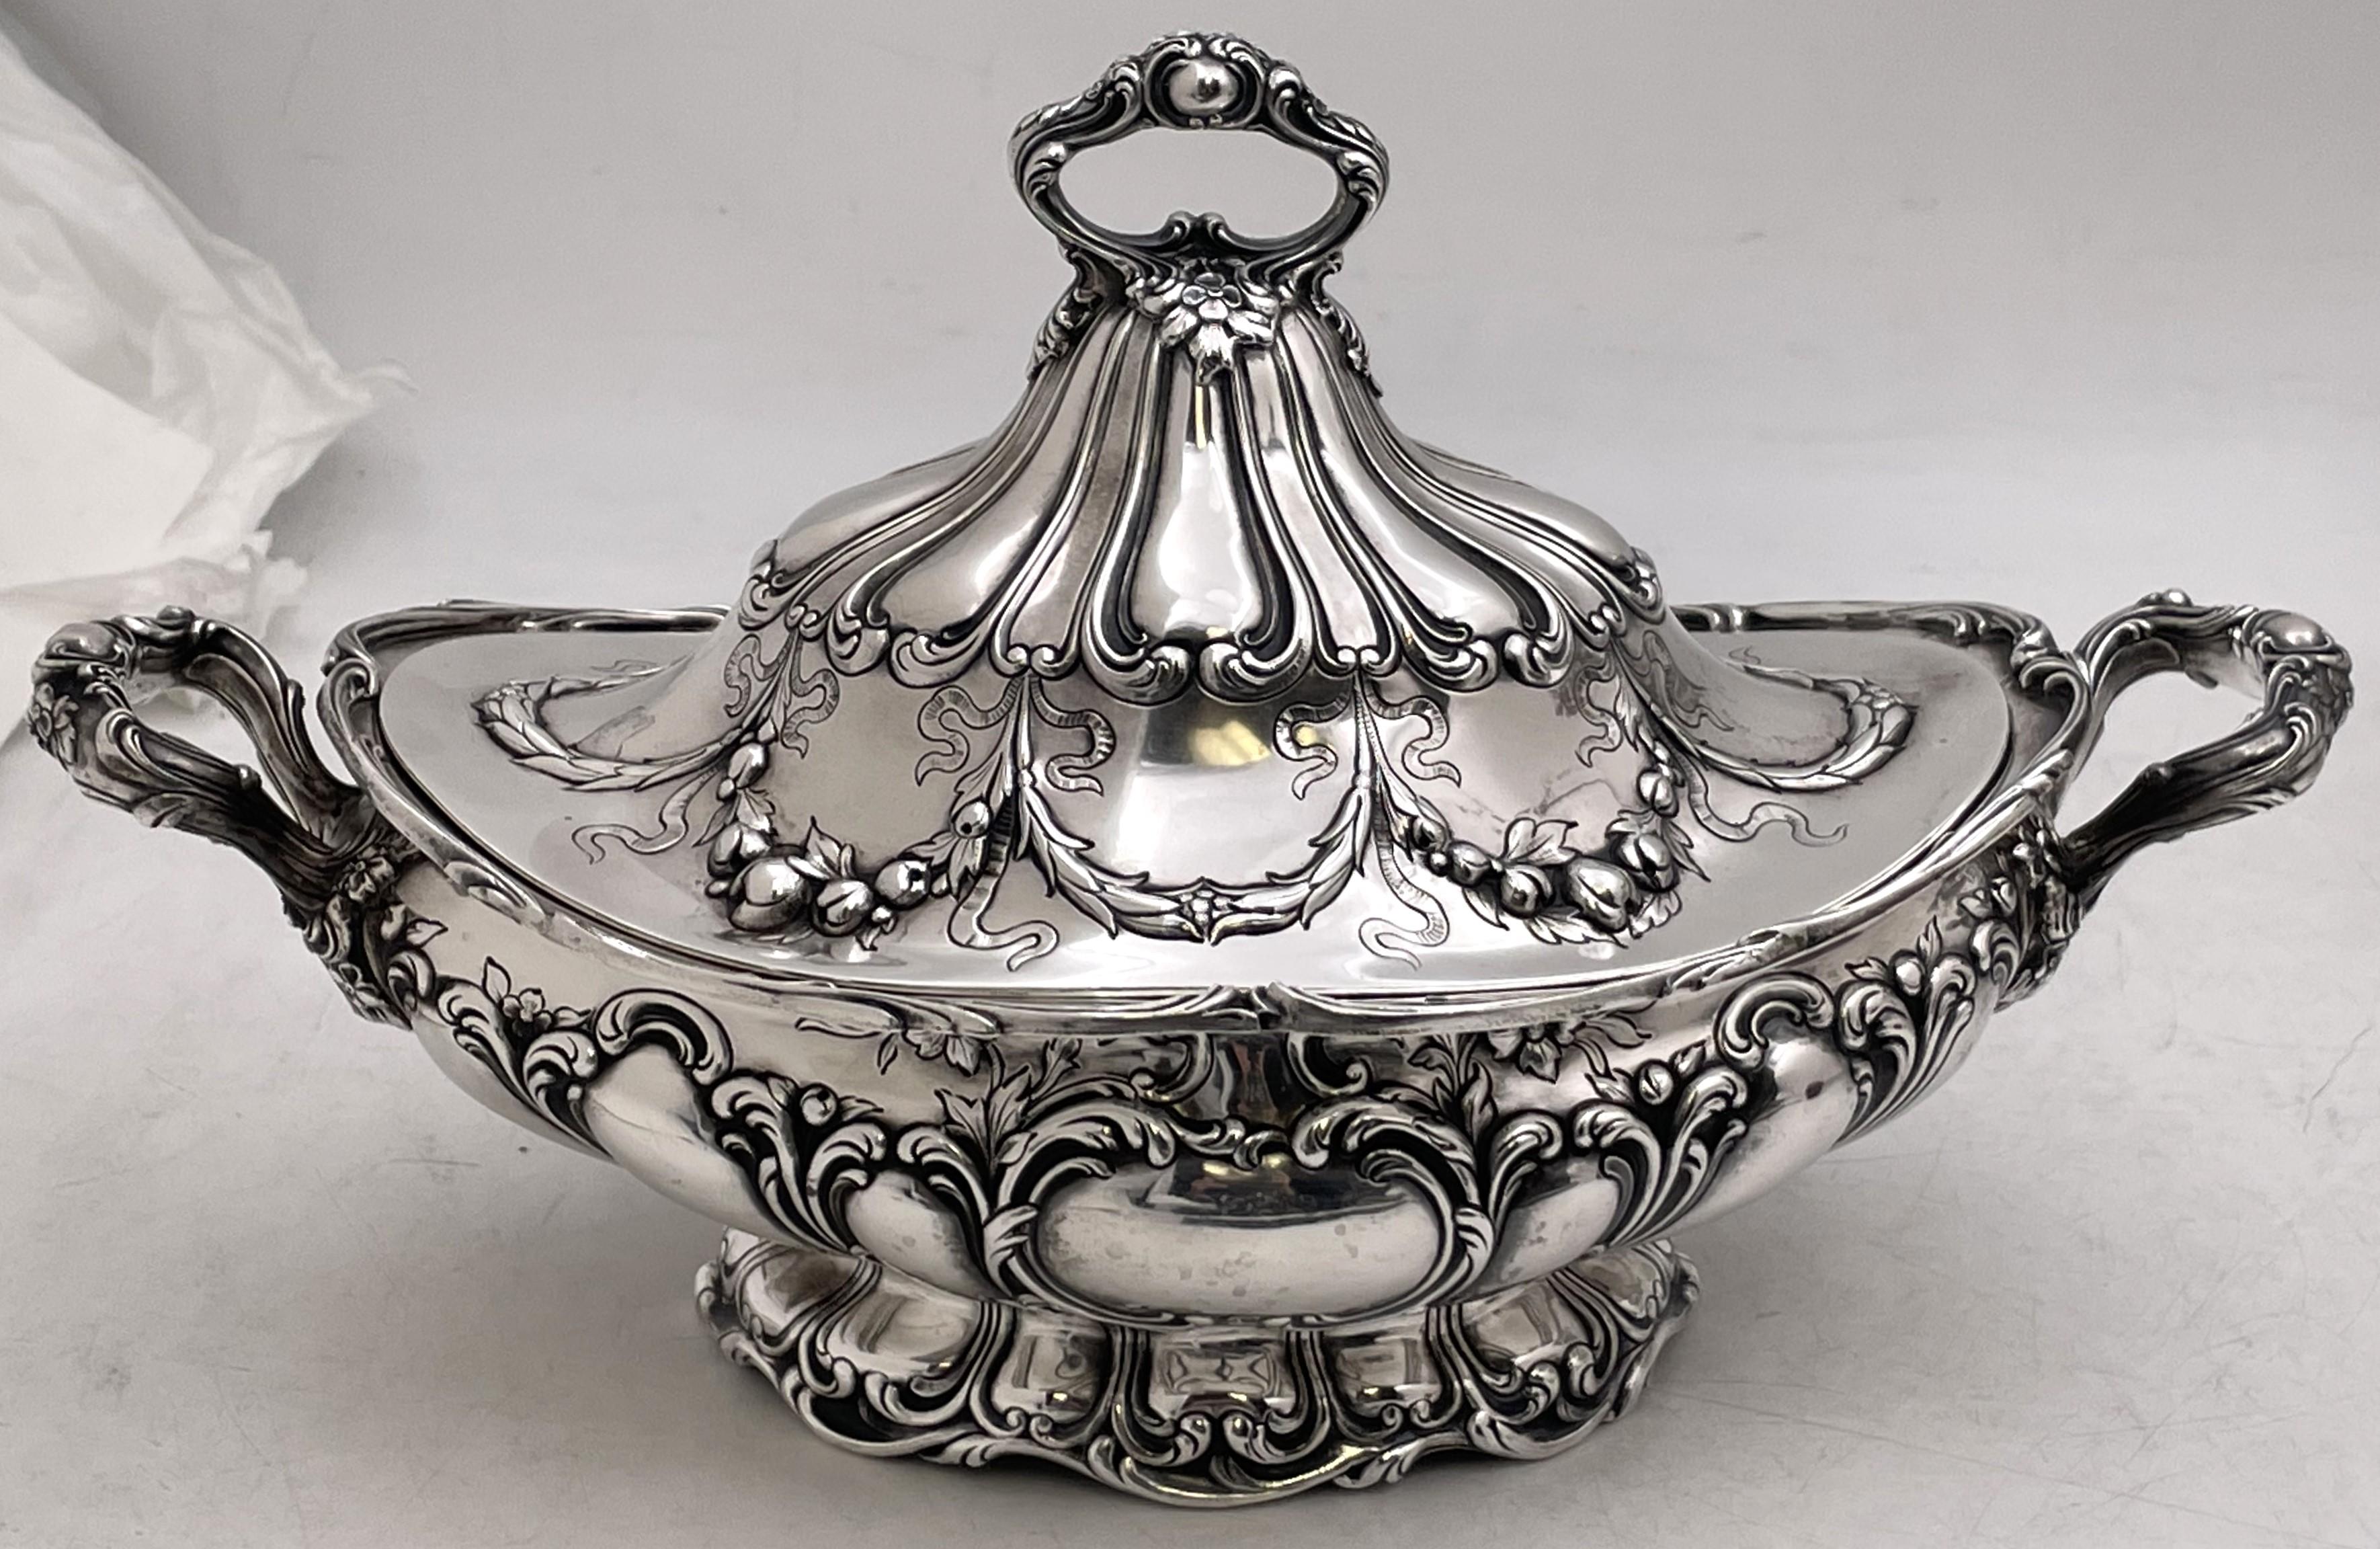 Pair of Gorham sterling silver covered tureens in the Grande Chantilly pattern, made circa 1900, in Art Nouveau style, the bodies and handles being beautifully adorned with raised floral and natural motifs. Finely crafted with graceful elegance